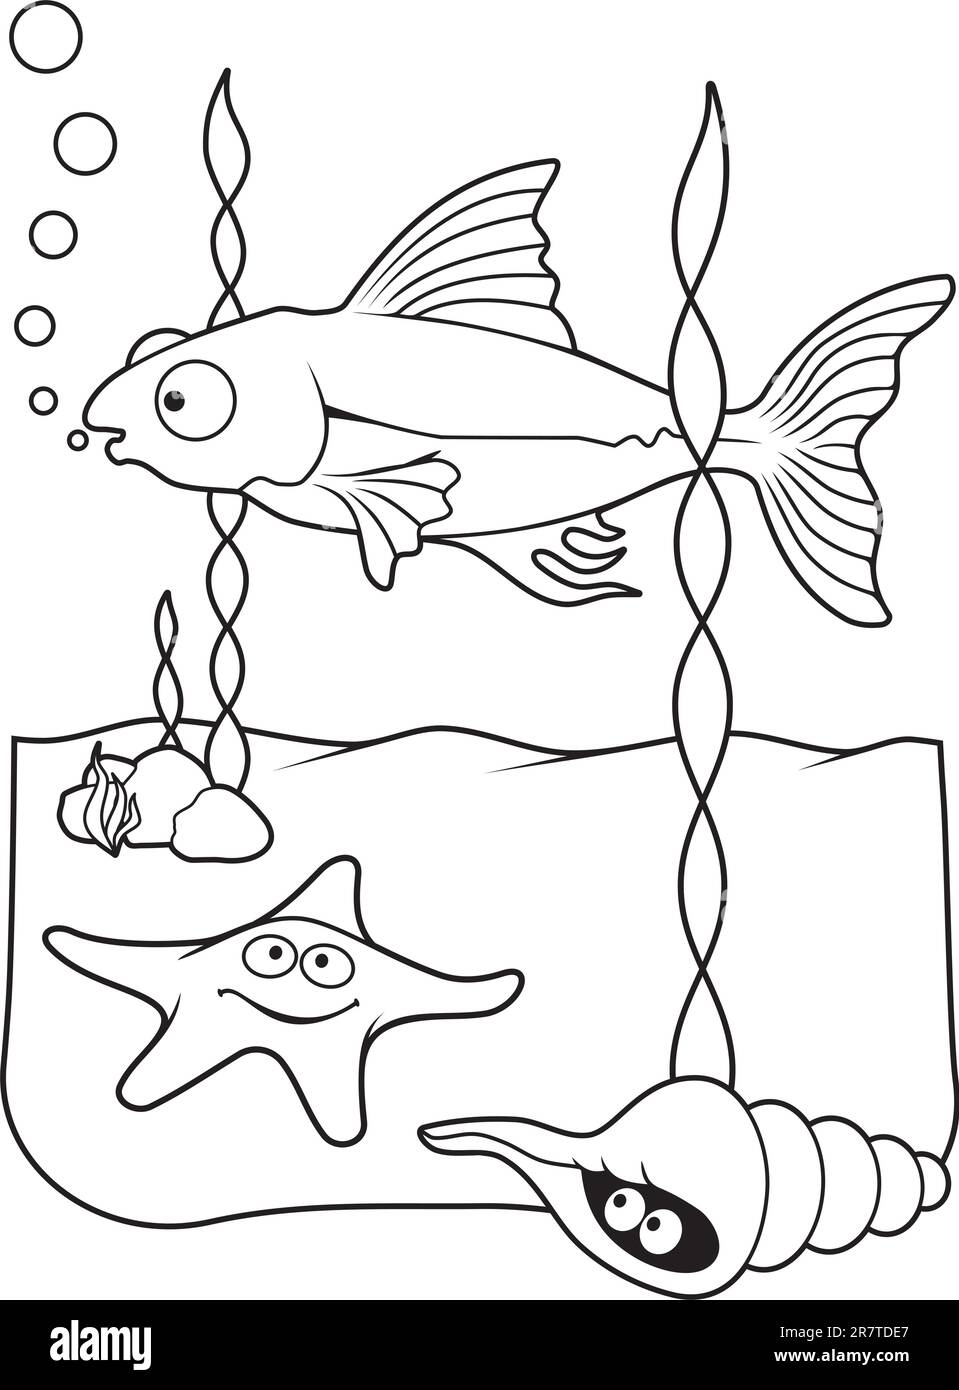 Underwater scene with fish starfish and shell cartoons, line art for coloring book page. Stock Vector